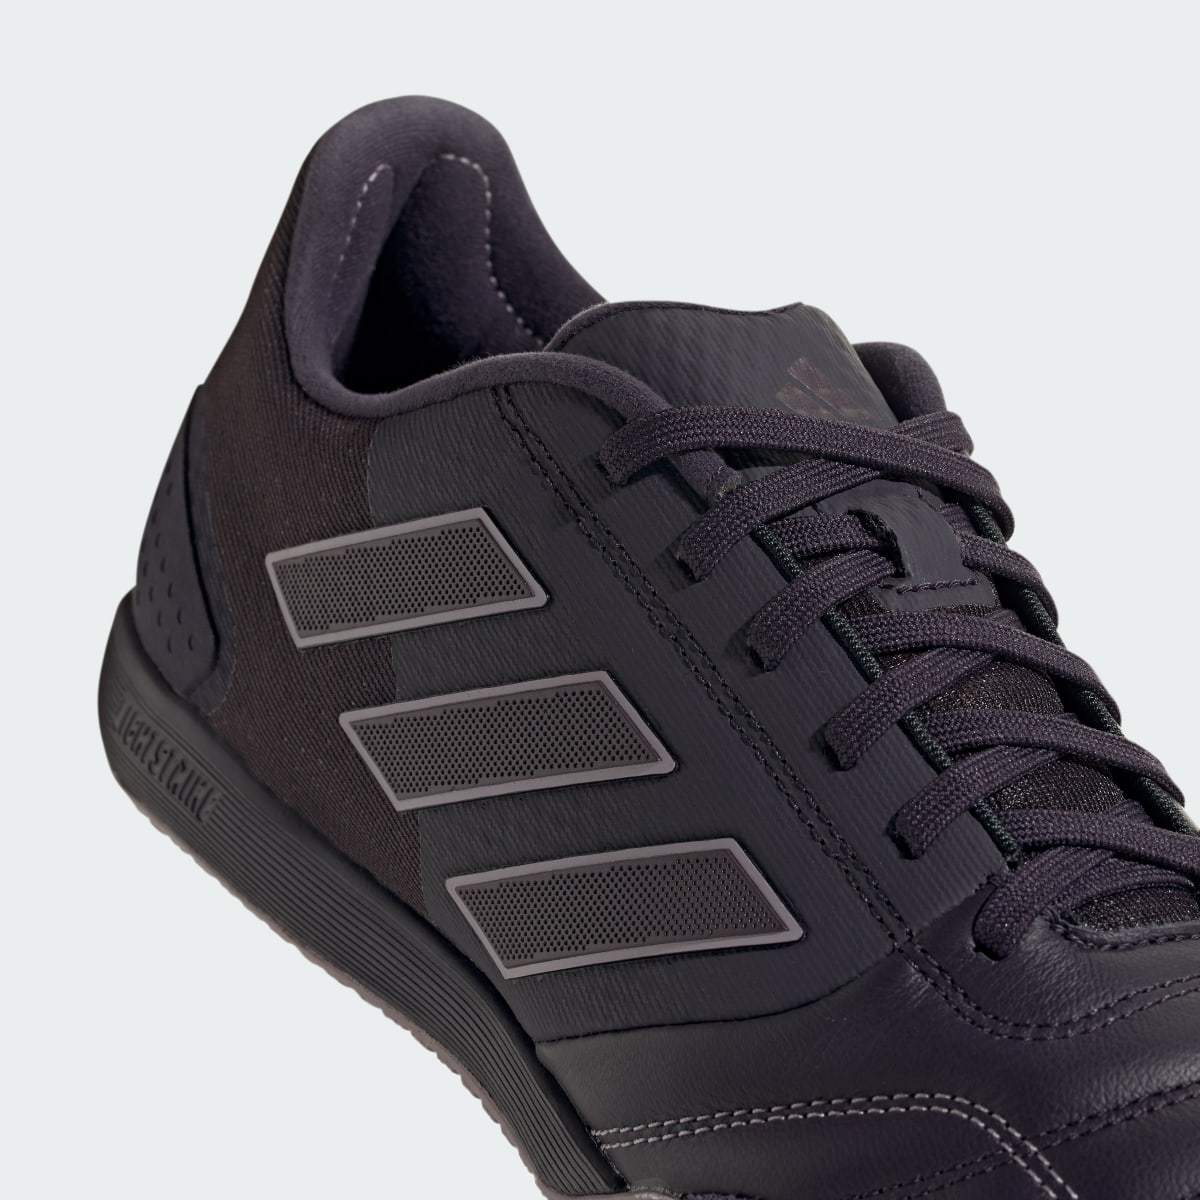 Adidas Top Sala Competition Indoor Boots. 10